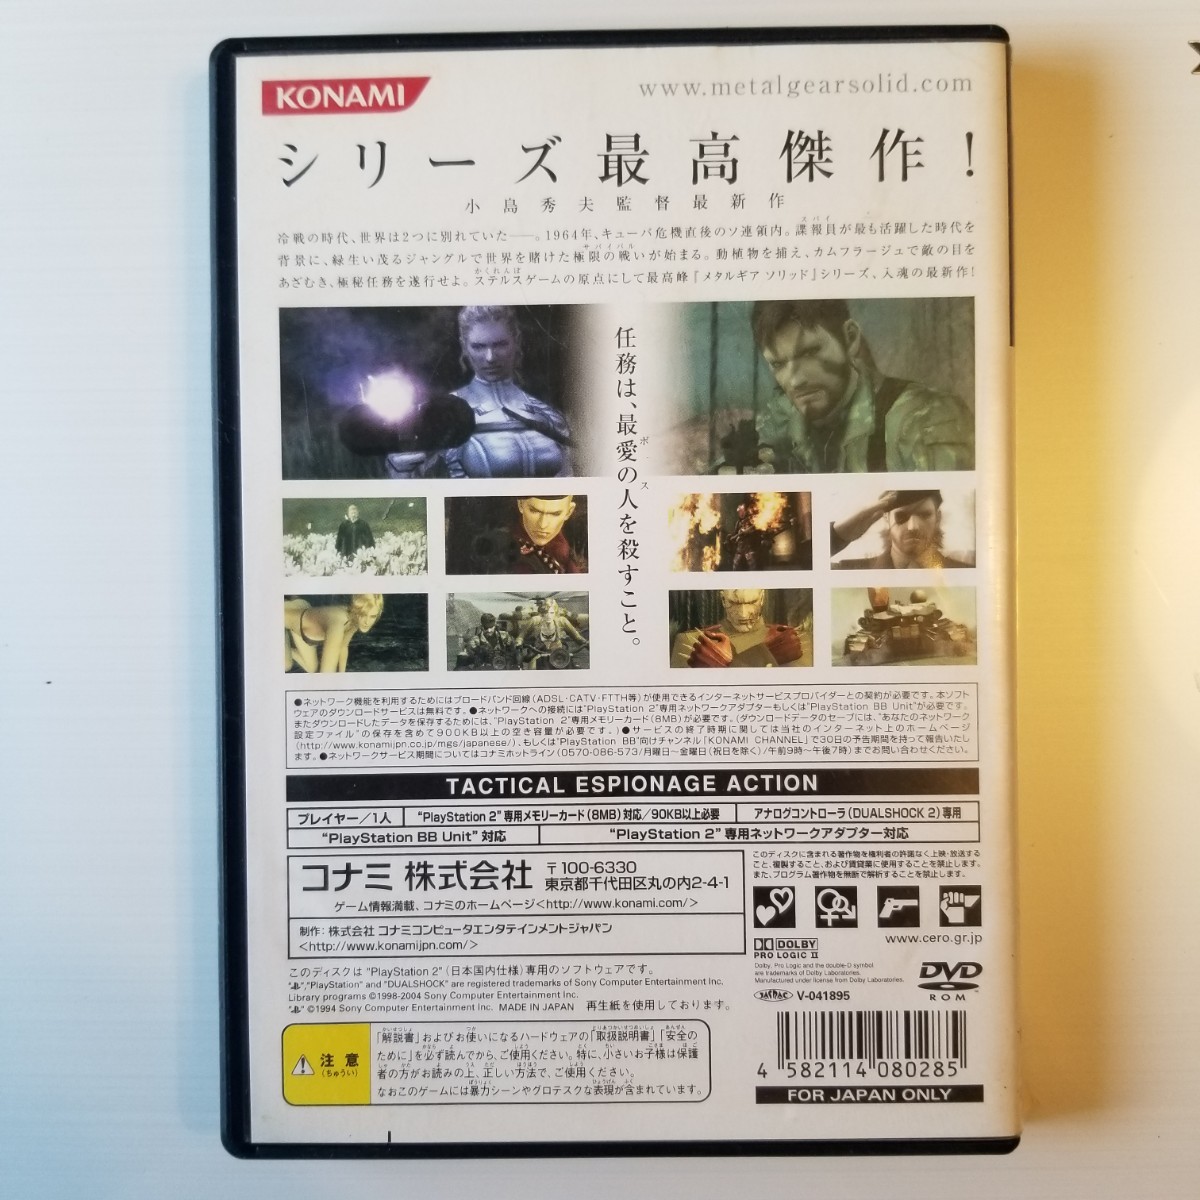 【PS2】METAL GEAR SOLID 3 SNAKE EATER 